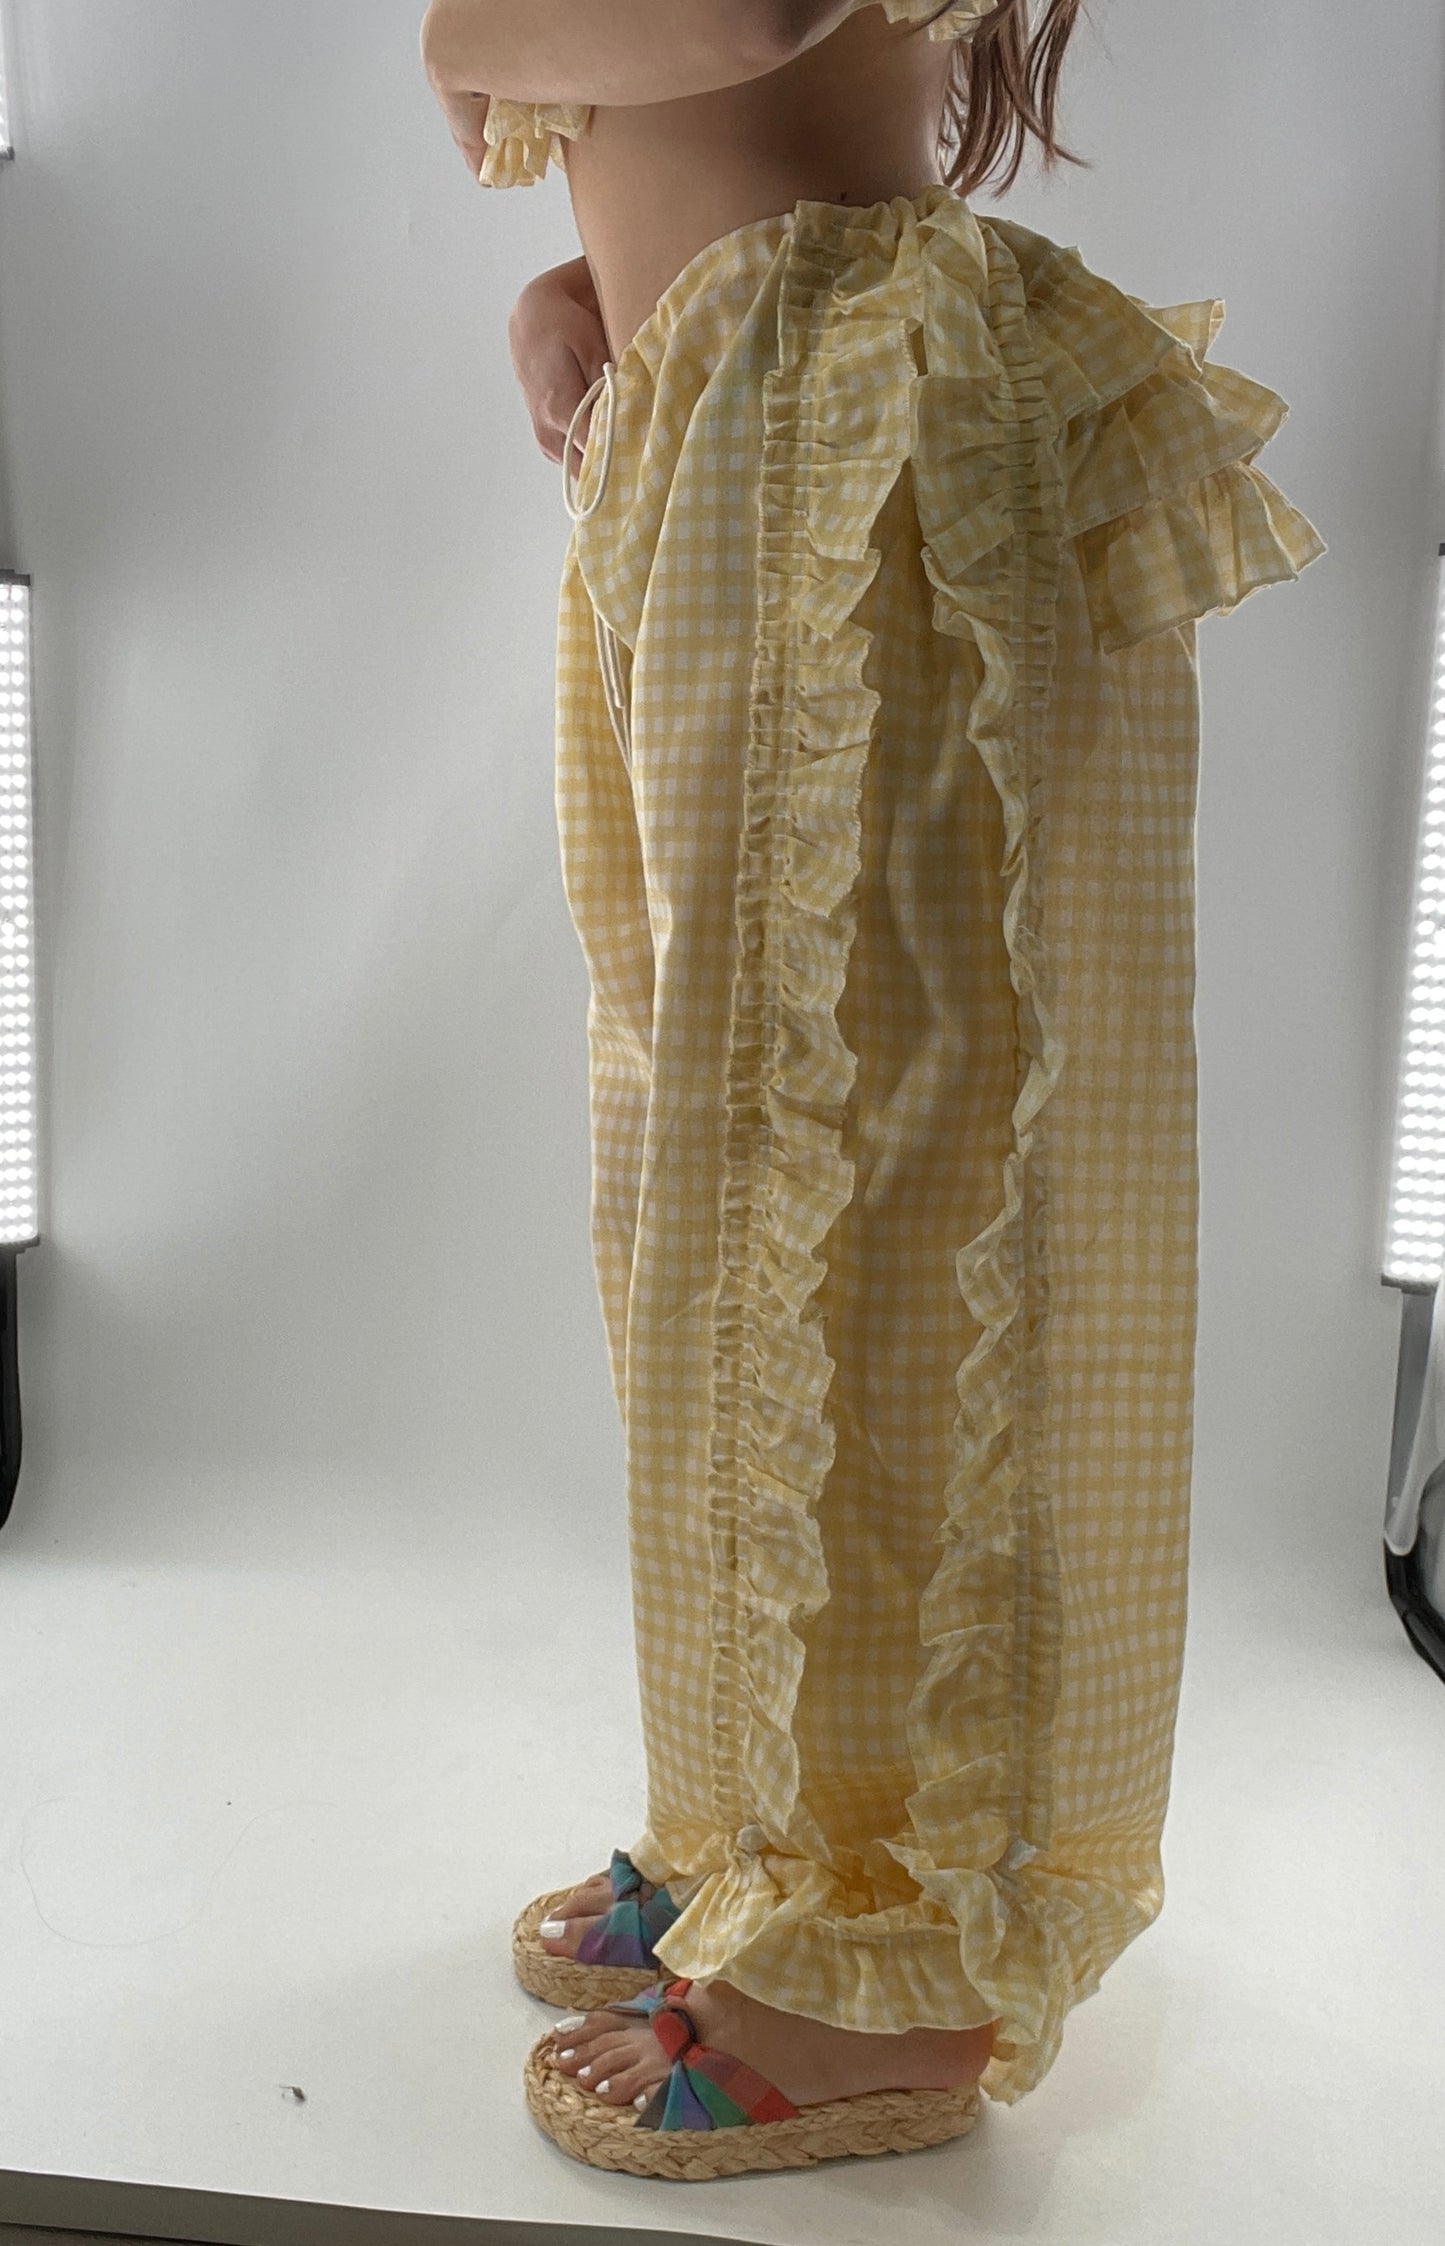 Vintage 2 Piece Yellow Checkered/Gingham Patterned Picnic Set with Ruched Bust Top and Ruffle Side Wide Legs with Adjustable Length, Strap Up Buttons on Hem (One Size)